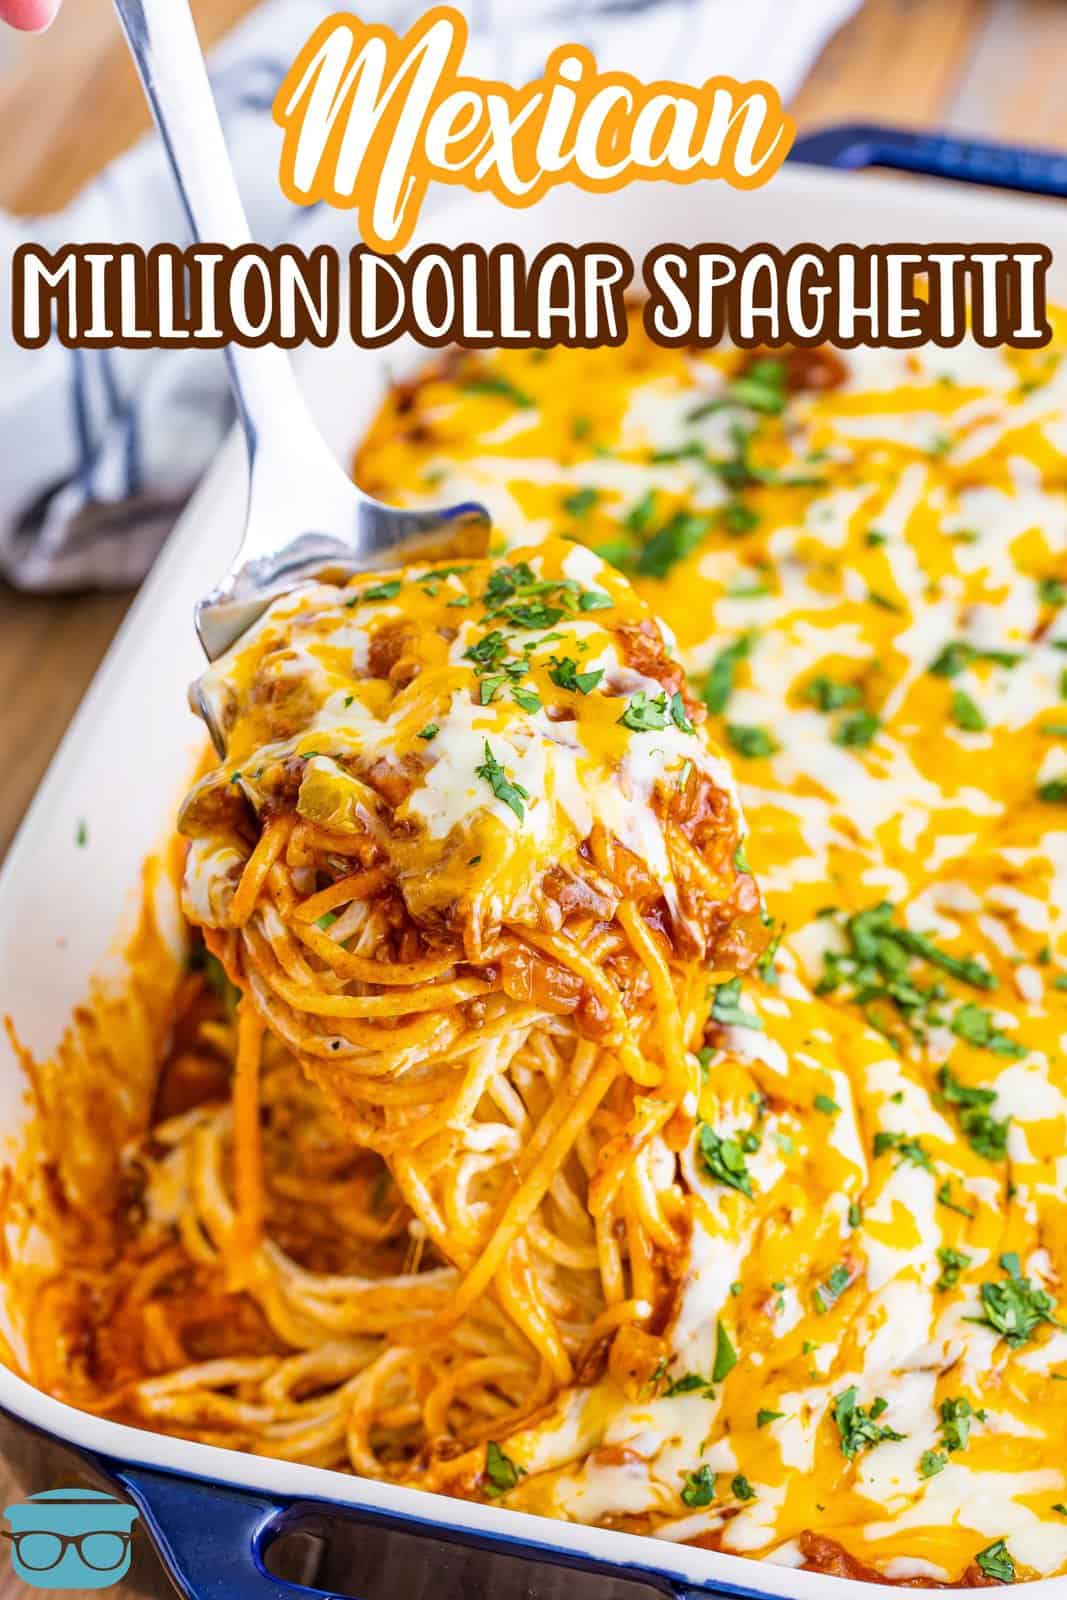 This is a photo of Mexican Million Dollar Spaghetti baked in a white casserole dish, with a spoon filled, ready to serve.